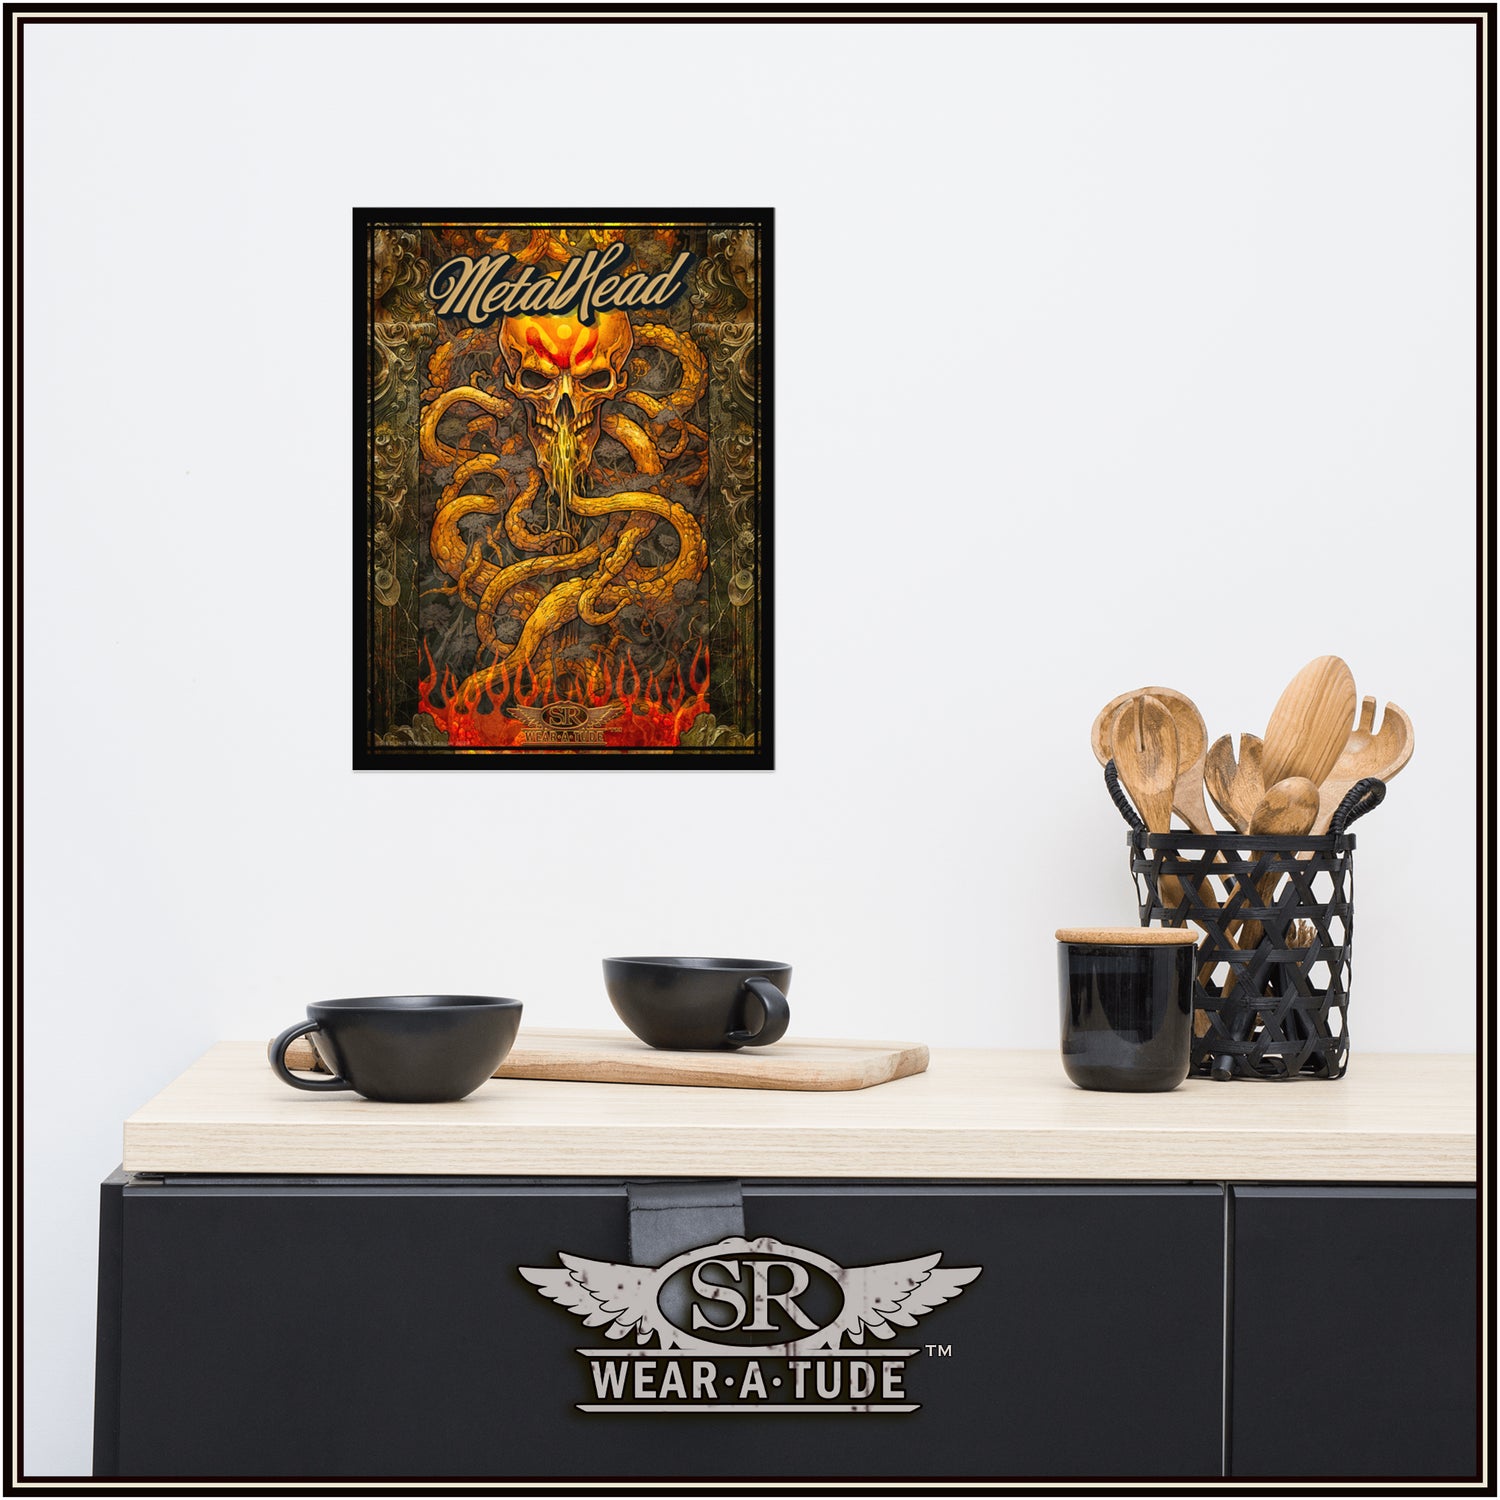 Looking for a metal-rock print for your music room? This high-resolution image featuring a skull with tentacles trimmed with intricate marble pillars will look epic on any wall.<br>Our museum-quality posters are made on thick matte paper. Add a wonderful accent to your room and office with these quality posters from SR Wear Atude.